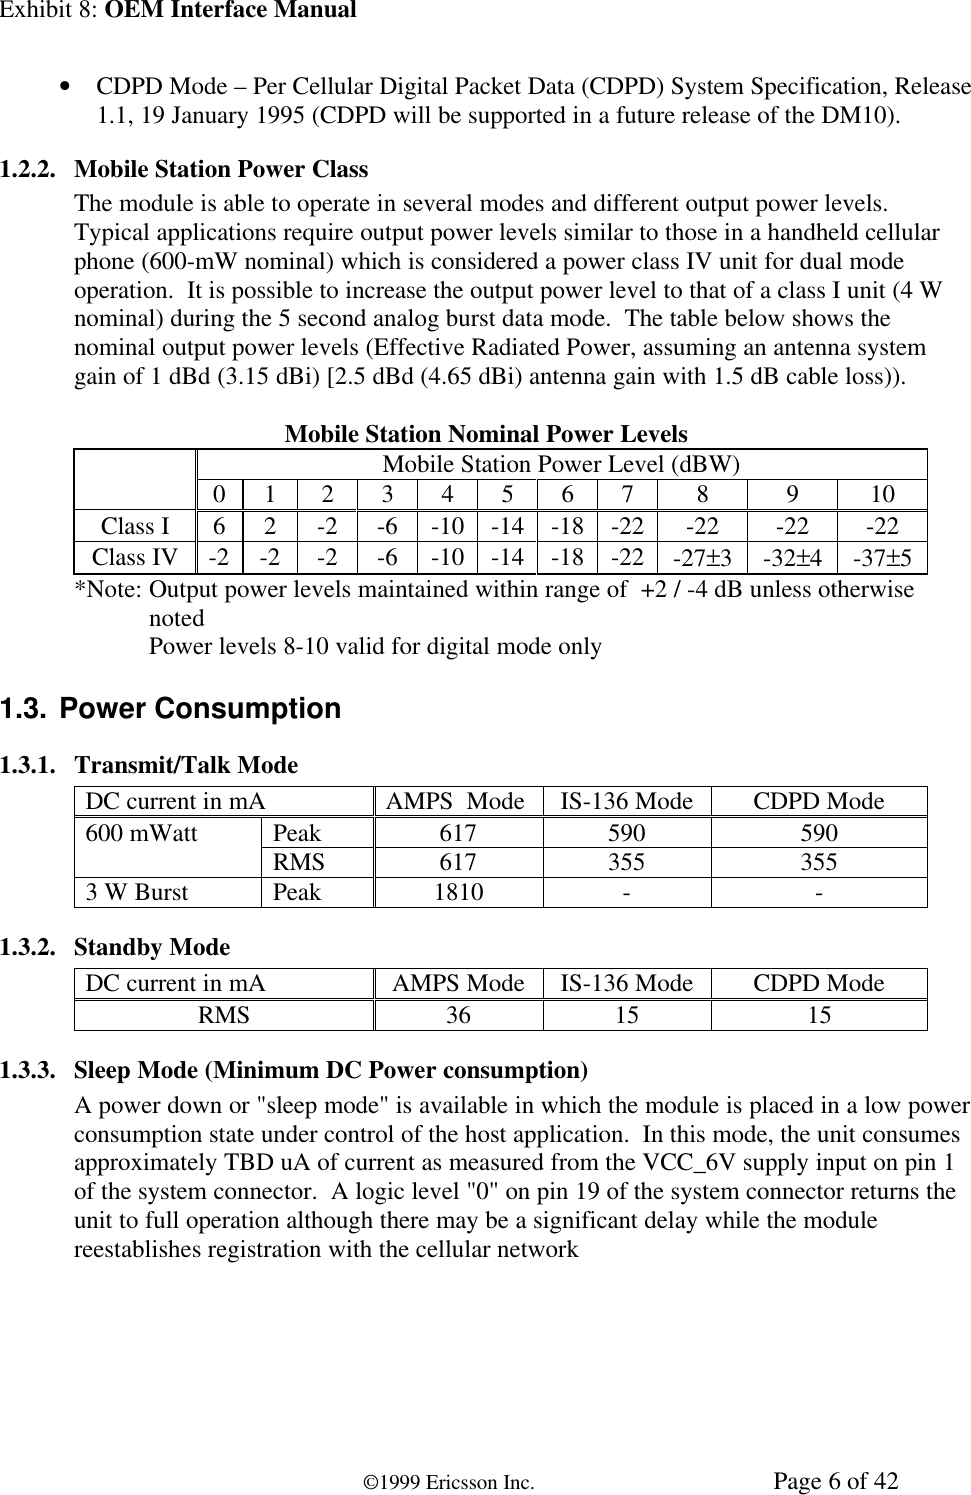 Exhibit 8: OEM Interface Manual©1999 Ericsson Inc. Page 6 of 42• CDPD Mode – Per Cellular Digital Packet Data (CDPD) System Specification, Release1.1, 19 January 1995 (CDPD will be supported in a future release of the DM10).1.2.2. Mobile Station Power ClassThe module is able to operate in several modes and different output power levels.Typical applications require output power levels similar to those in a handheld cellularphone (600-mW nominal) which is considered a power class IV unit for dual modeoperation.  It is possible to increase the output power level to that of a class I unit (4 Wnominal) during the 5 second analog burst data mode.  The table below shows thenominal output power levels (Effective Radiated Power, assuming an antenna systemgain of 1 dBd (3.15 dBi) [2.5 dBd (4.65 dBi) antenna gain with 1.5 dB cable loss)).Mobile Station Nominal Power LevelsMobile Station Power Level (dBW)0 1 2 3 4 5 6 7 8 9 10Class I 6 2 -2 -6 -10 -14 -18 -22 -22 -22 -22Class IV -2 -2 -2 -6 -10 -14 -18 -22 -27±3-32±4-37±5*Note: Output power levels maintained within range of  +2 / -4 dB unless otherwisenotedPower levels 8-10 valid for digital mode only1.3. Power Consumption1.3.1. Transmit/Talk ModeDC current in mA AMPS  Mode IS-136 Mode CDPD ModePeak 617 590 590600 mWatt RMS 617 355 3553 W Burst Peak 1810 - -1.3.2. Standby ModeDC current in mA AMPS Mode IS-136 Mode CDPD ModeRMS 36 15 151.3.3. Sleep Mode (Minimum DC Power consumption)A power down or &quot;sleep mode&quot; is available in which the module is placed in a low powerconsumption state under control of the host application.  In this mode, the unit consumesapproximately TBD uA of current as measured from the VCC_6V supply input on pin 1of the system connector.  A logic level &quot;0&quot; on pin 19 of the system connector returns theunit to full operation although there may be a significant delay while the modulereestablishes registration with the cellular network